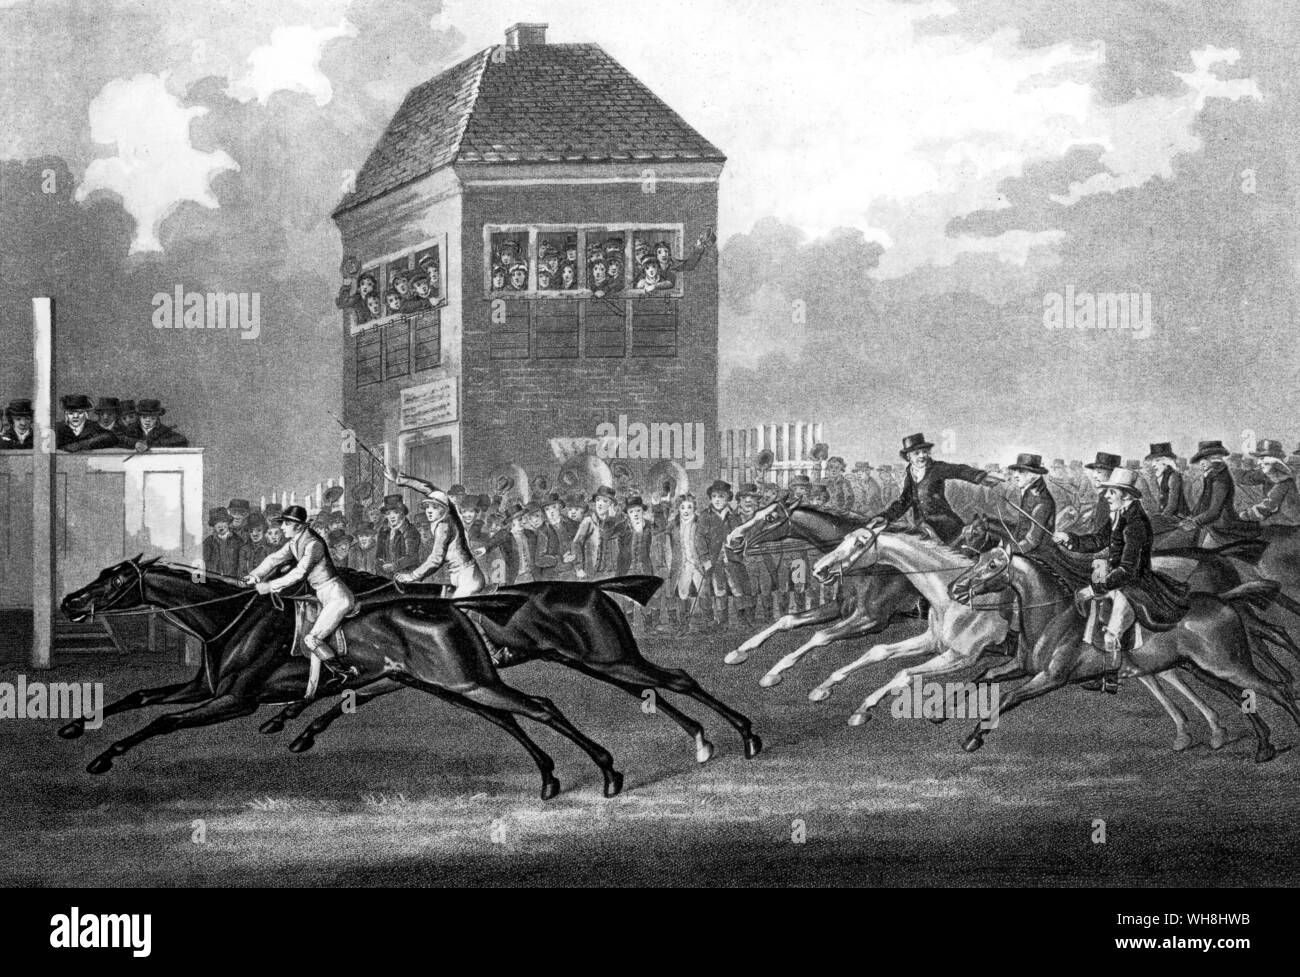 The Hambletonian-Diamond Match. 'The famous match between Sir Harry Tempest Vane's horse Hambletonian carring 8 stone 3 pounds rode by Mr Buckle beating Diamond, the Property of Joseph Cookson Esq over the Beacon Course, Newmarket, on Monday the 25th March 1799 being the Craven Meeting. This race was run for three thousand guineas a side half forfeit. Diamond was rode by Mr Dennis Fitzpatrick and carried 8 stone. Betting was 5 to 1 on Hambletonian at Starting. The Beacon Course is nearly Straight and is four miles and near two furlongs in length. The race was run in eight minutes and a half.' Stock Photo